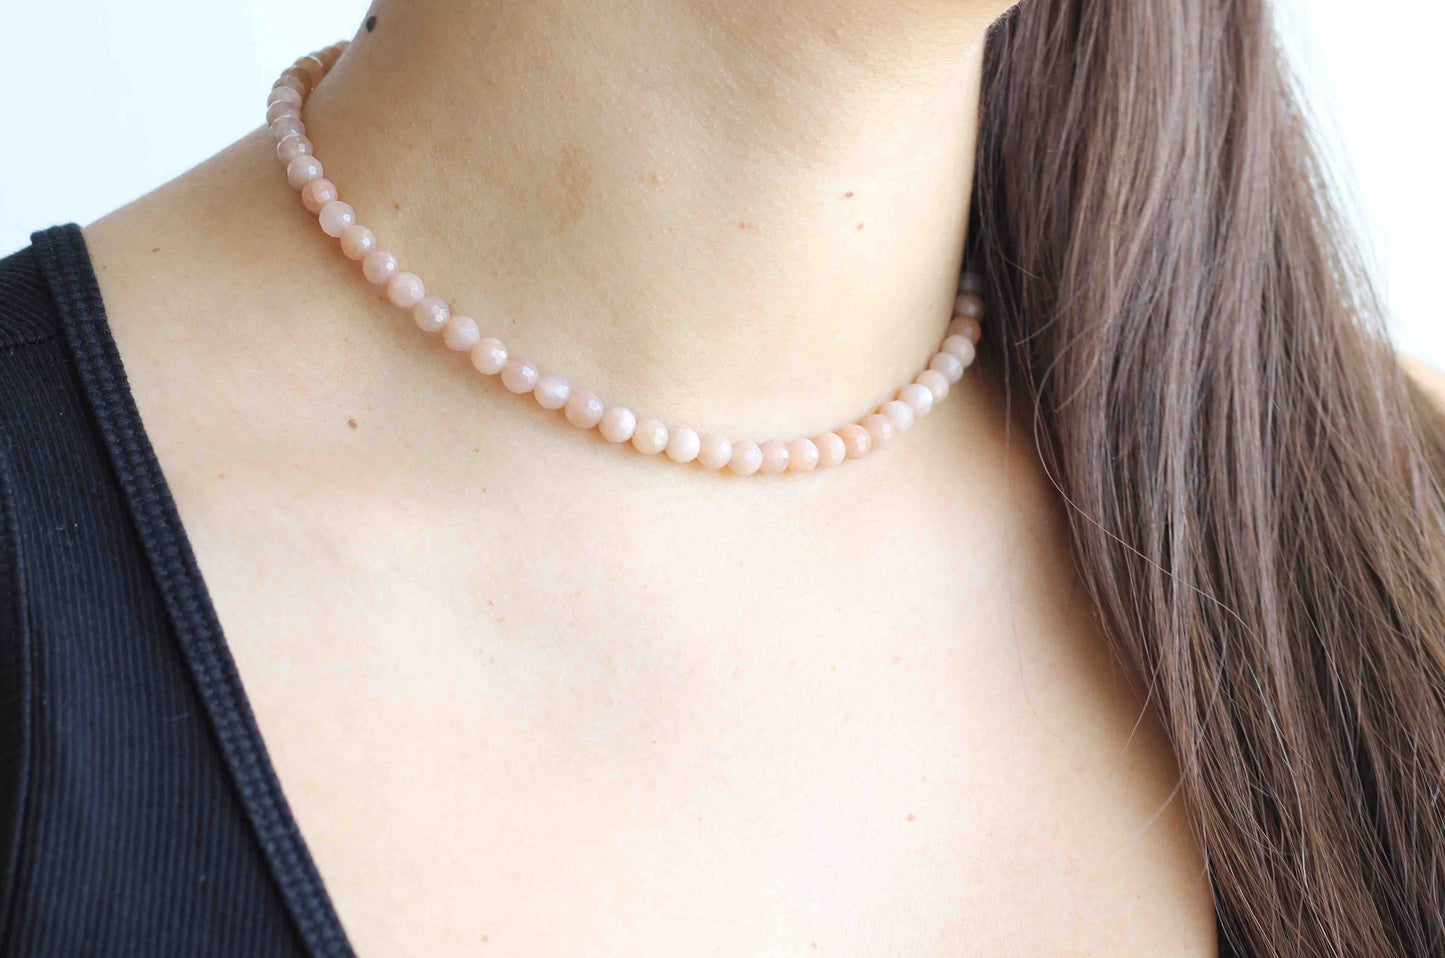 Handmade Minimalist Pink Moonstone 6mm Beaded Gemstone Choker Necklace with Sterling Silver Closure